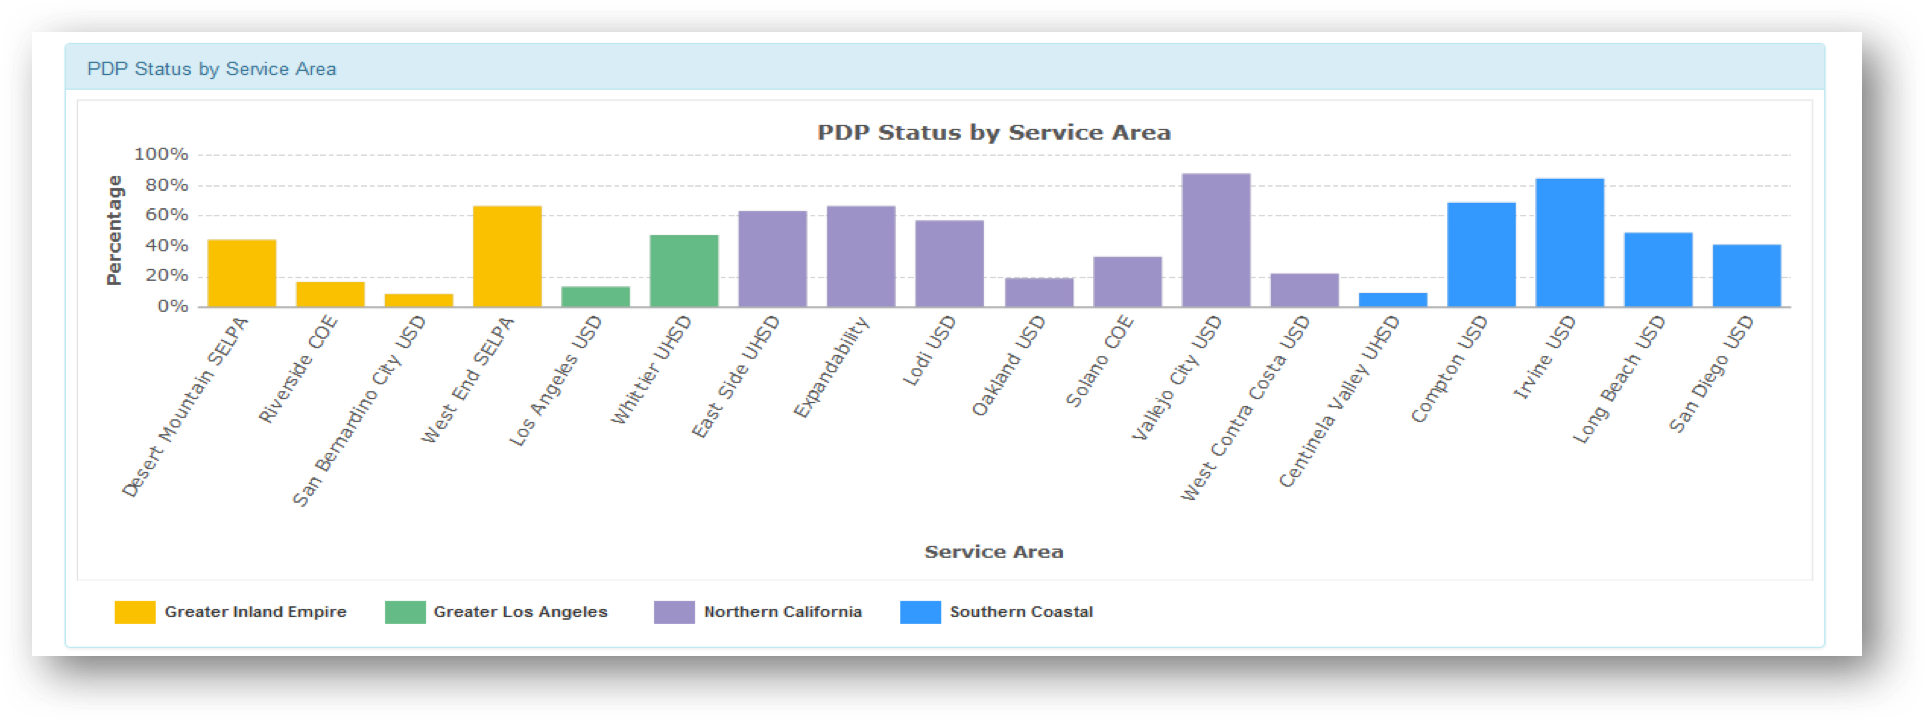 Screenshot image of the PDP Status by Service Area chart.